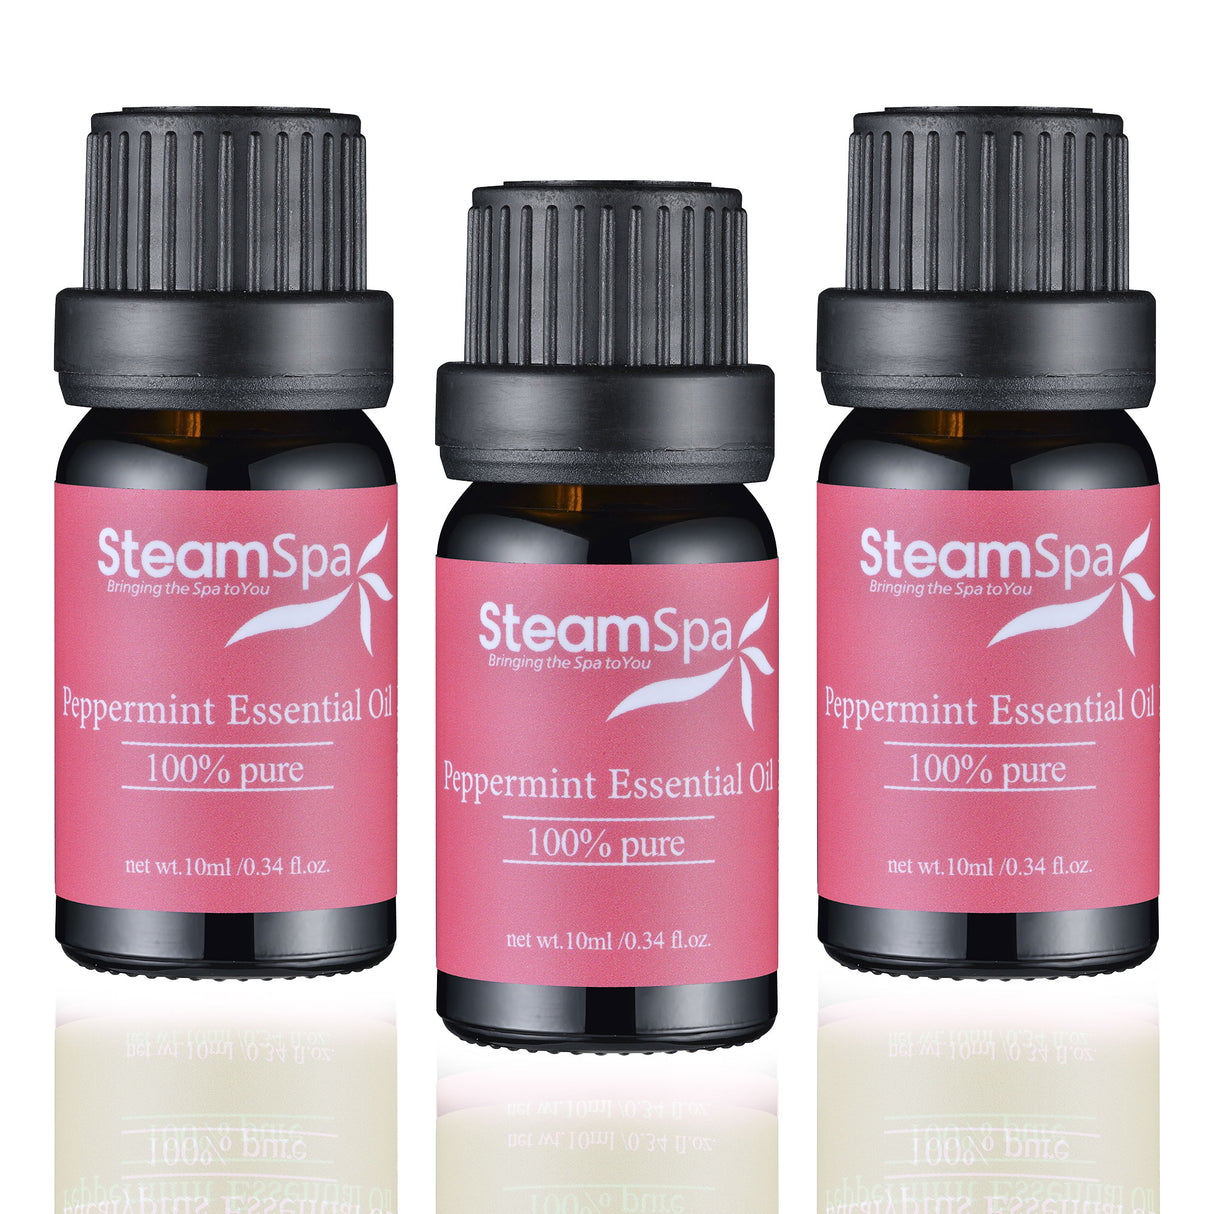 SteamSpa Essence of Peppermint Aromatherapy Oil Extract Value Pack G-OILPEP3